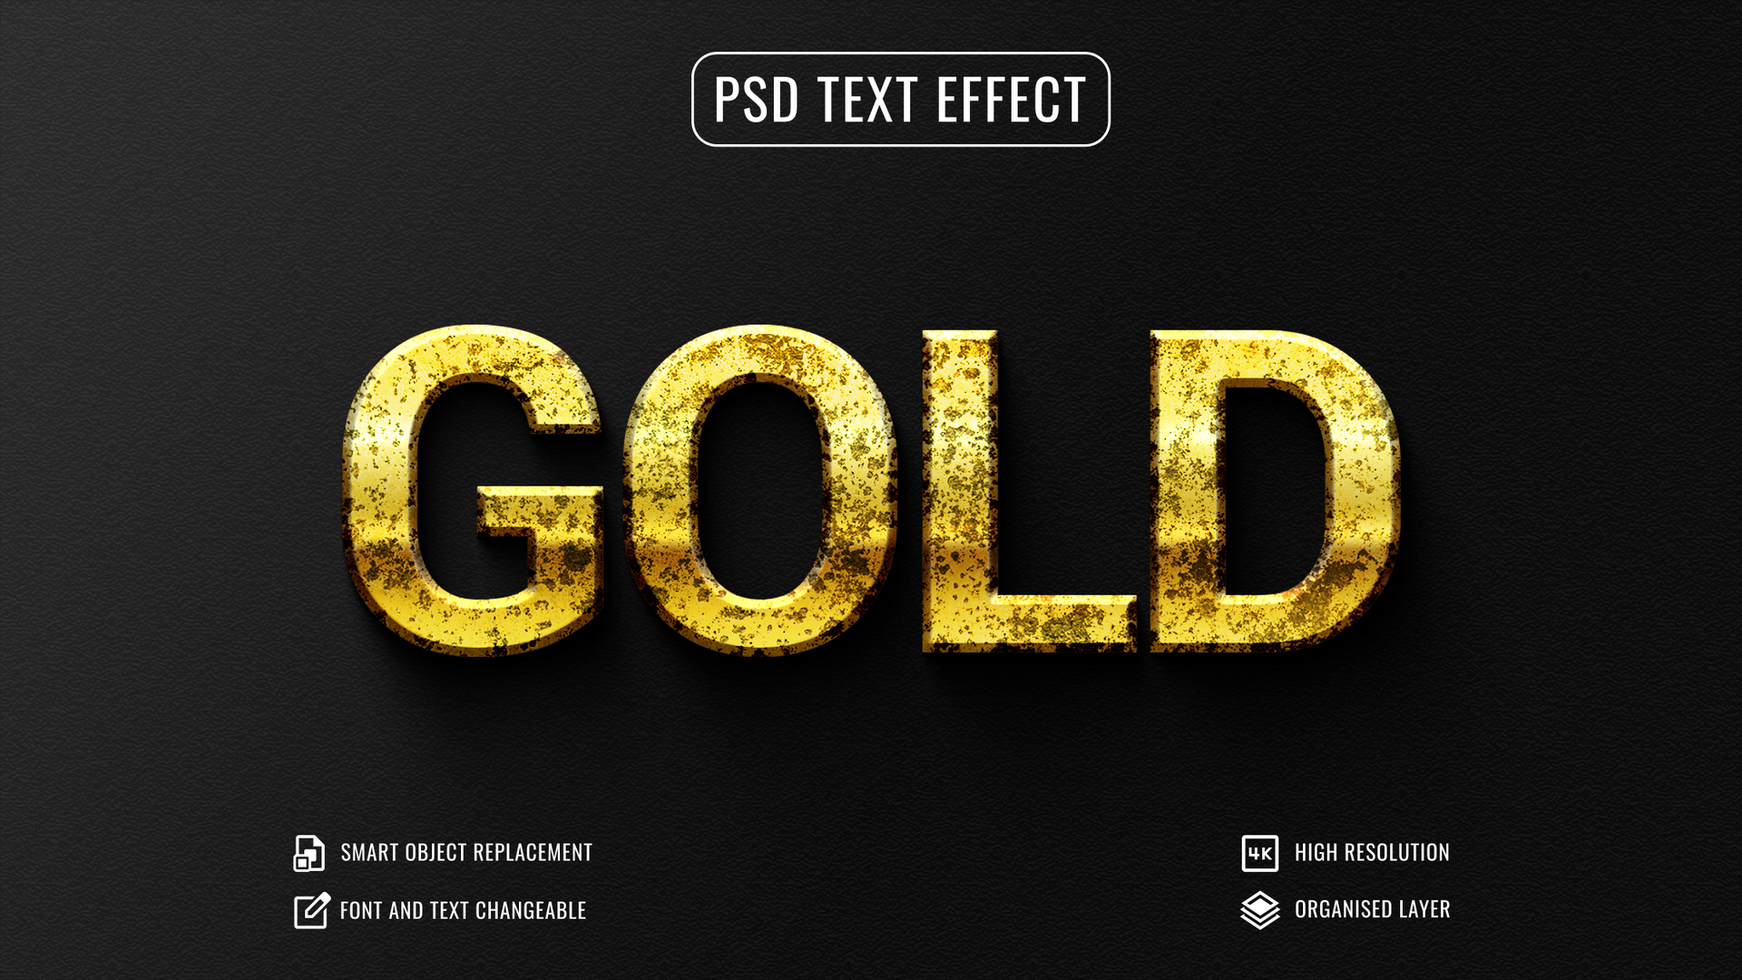 luxury metal font style mockup, shining gold editable 3d text effect psd